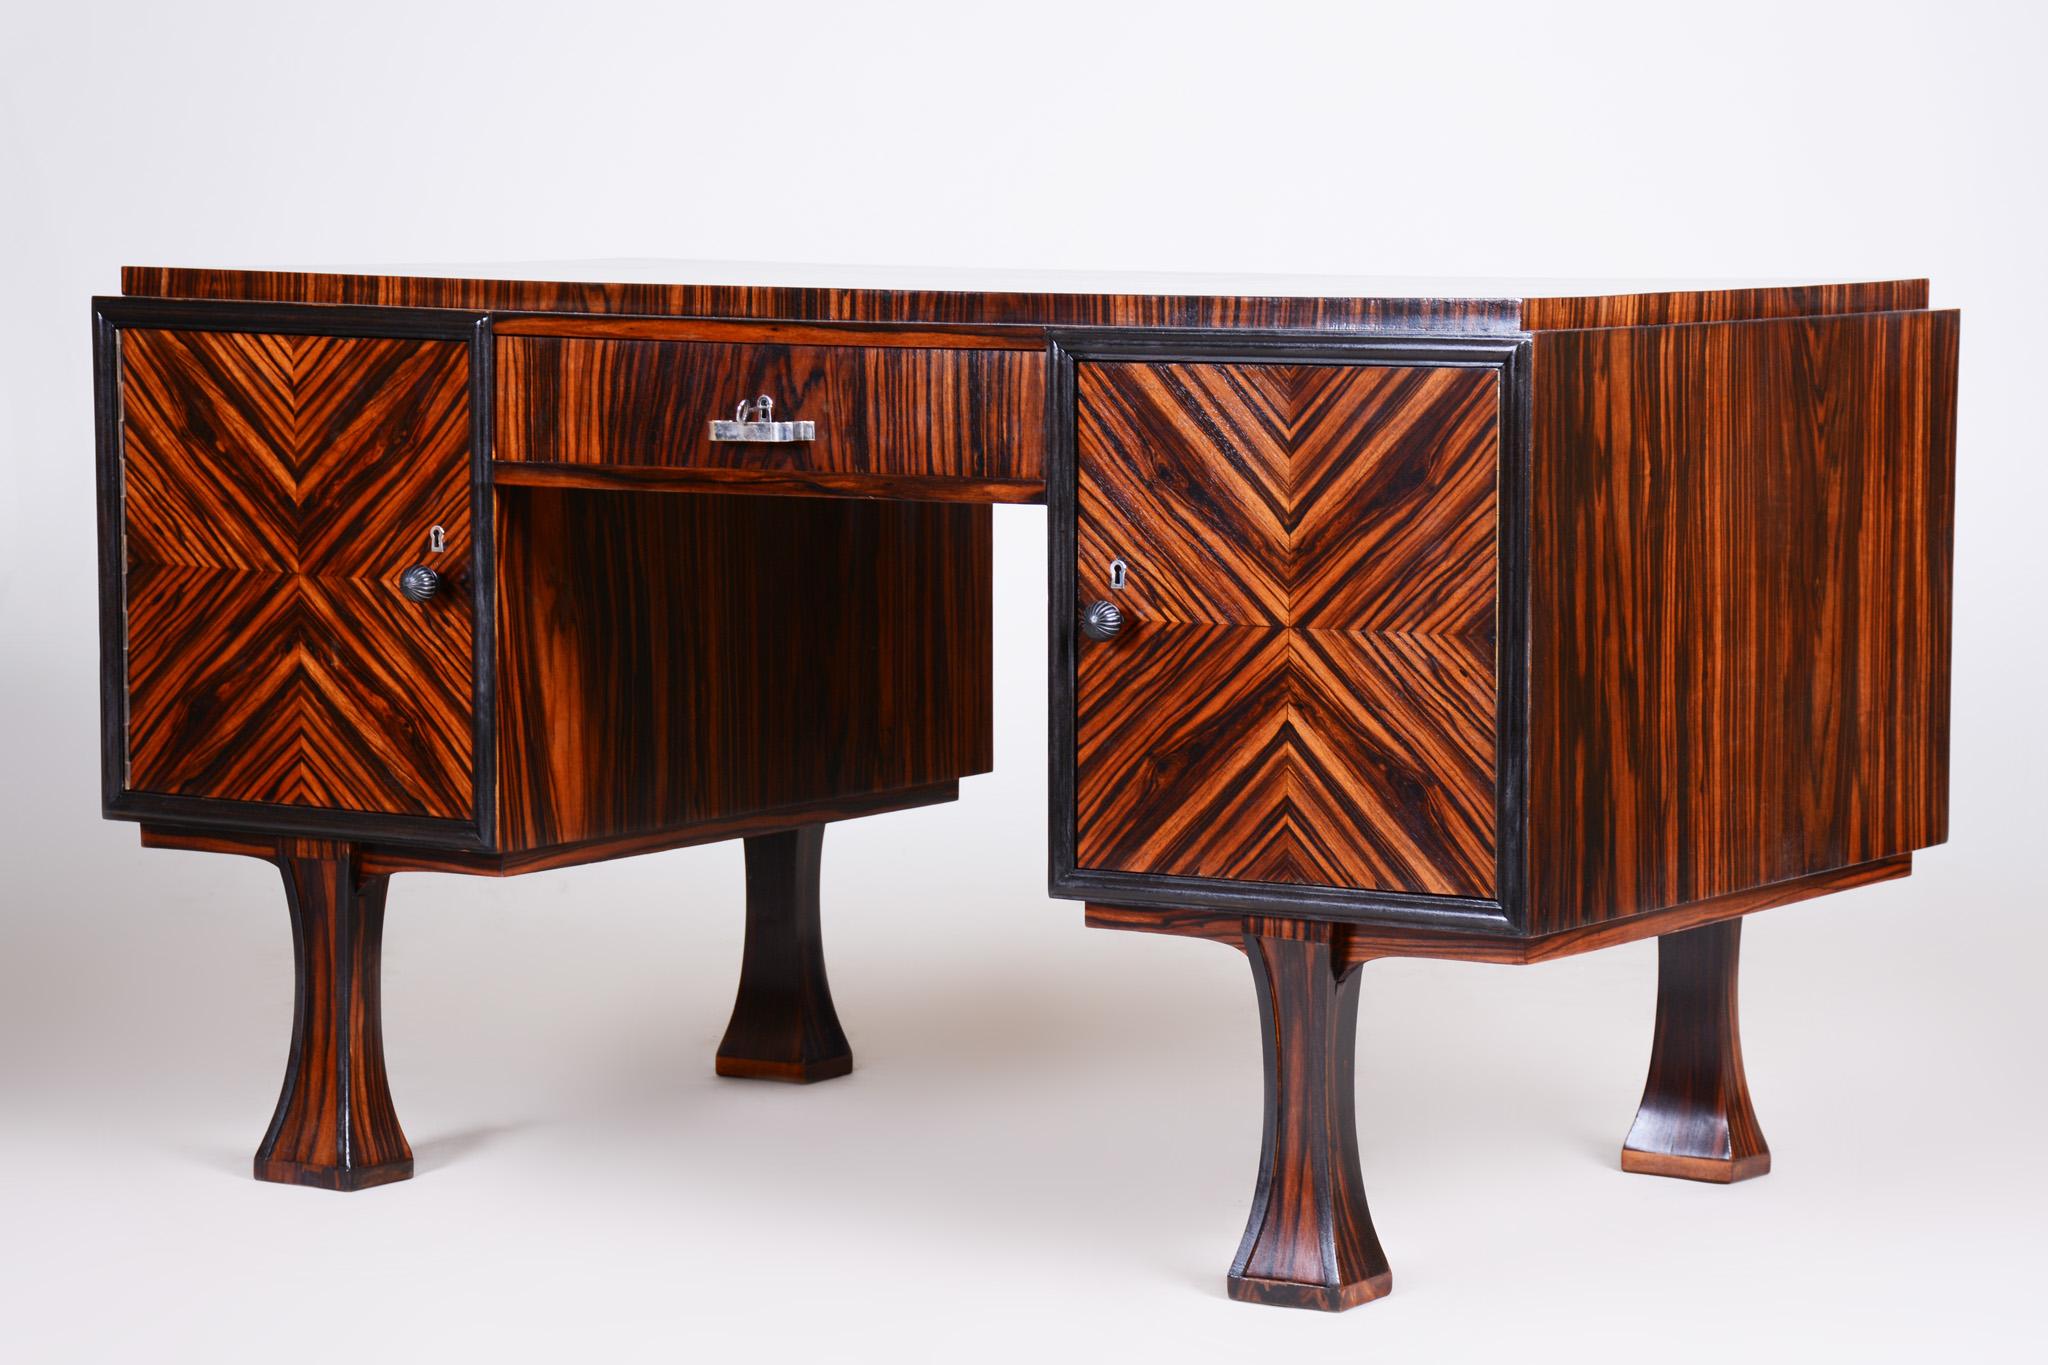 Lacquer French Art Deco Writing Desk Made in the 1920s, Restored Ebony